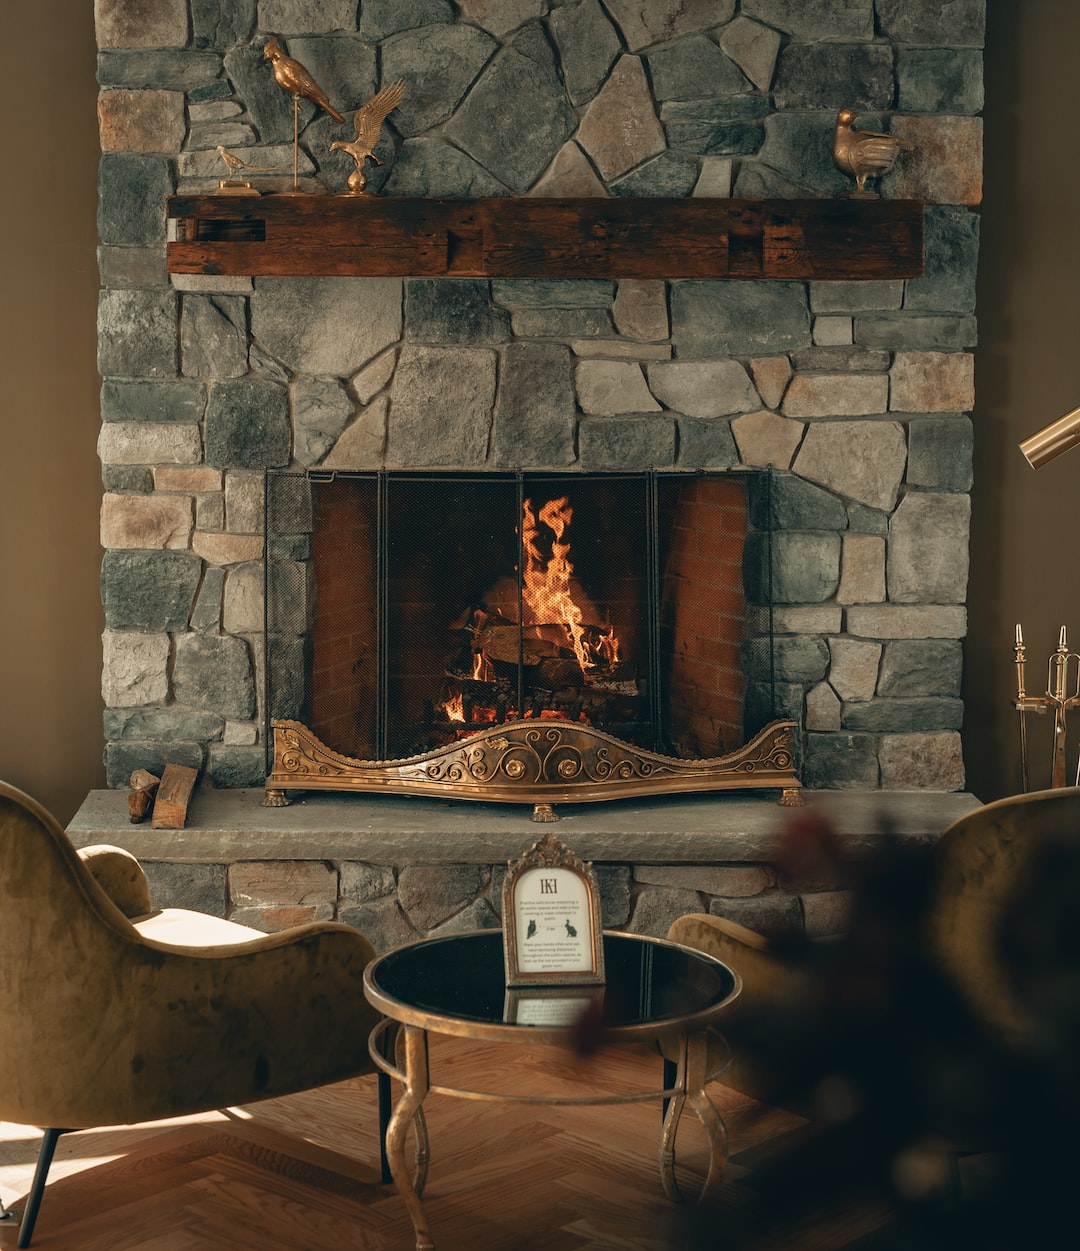 A cozy fire in the winter is one of the best parts of the chilly weather. A wood-burning fireplace comes with some special maintenance.